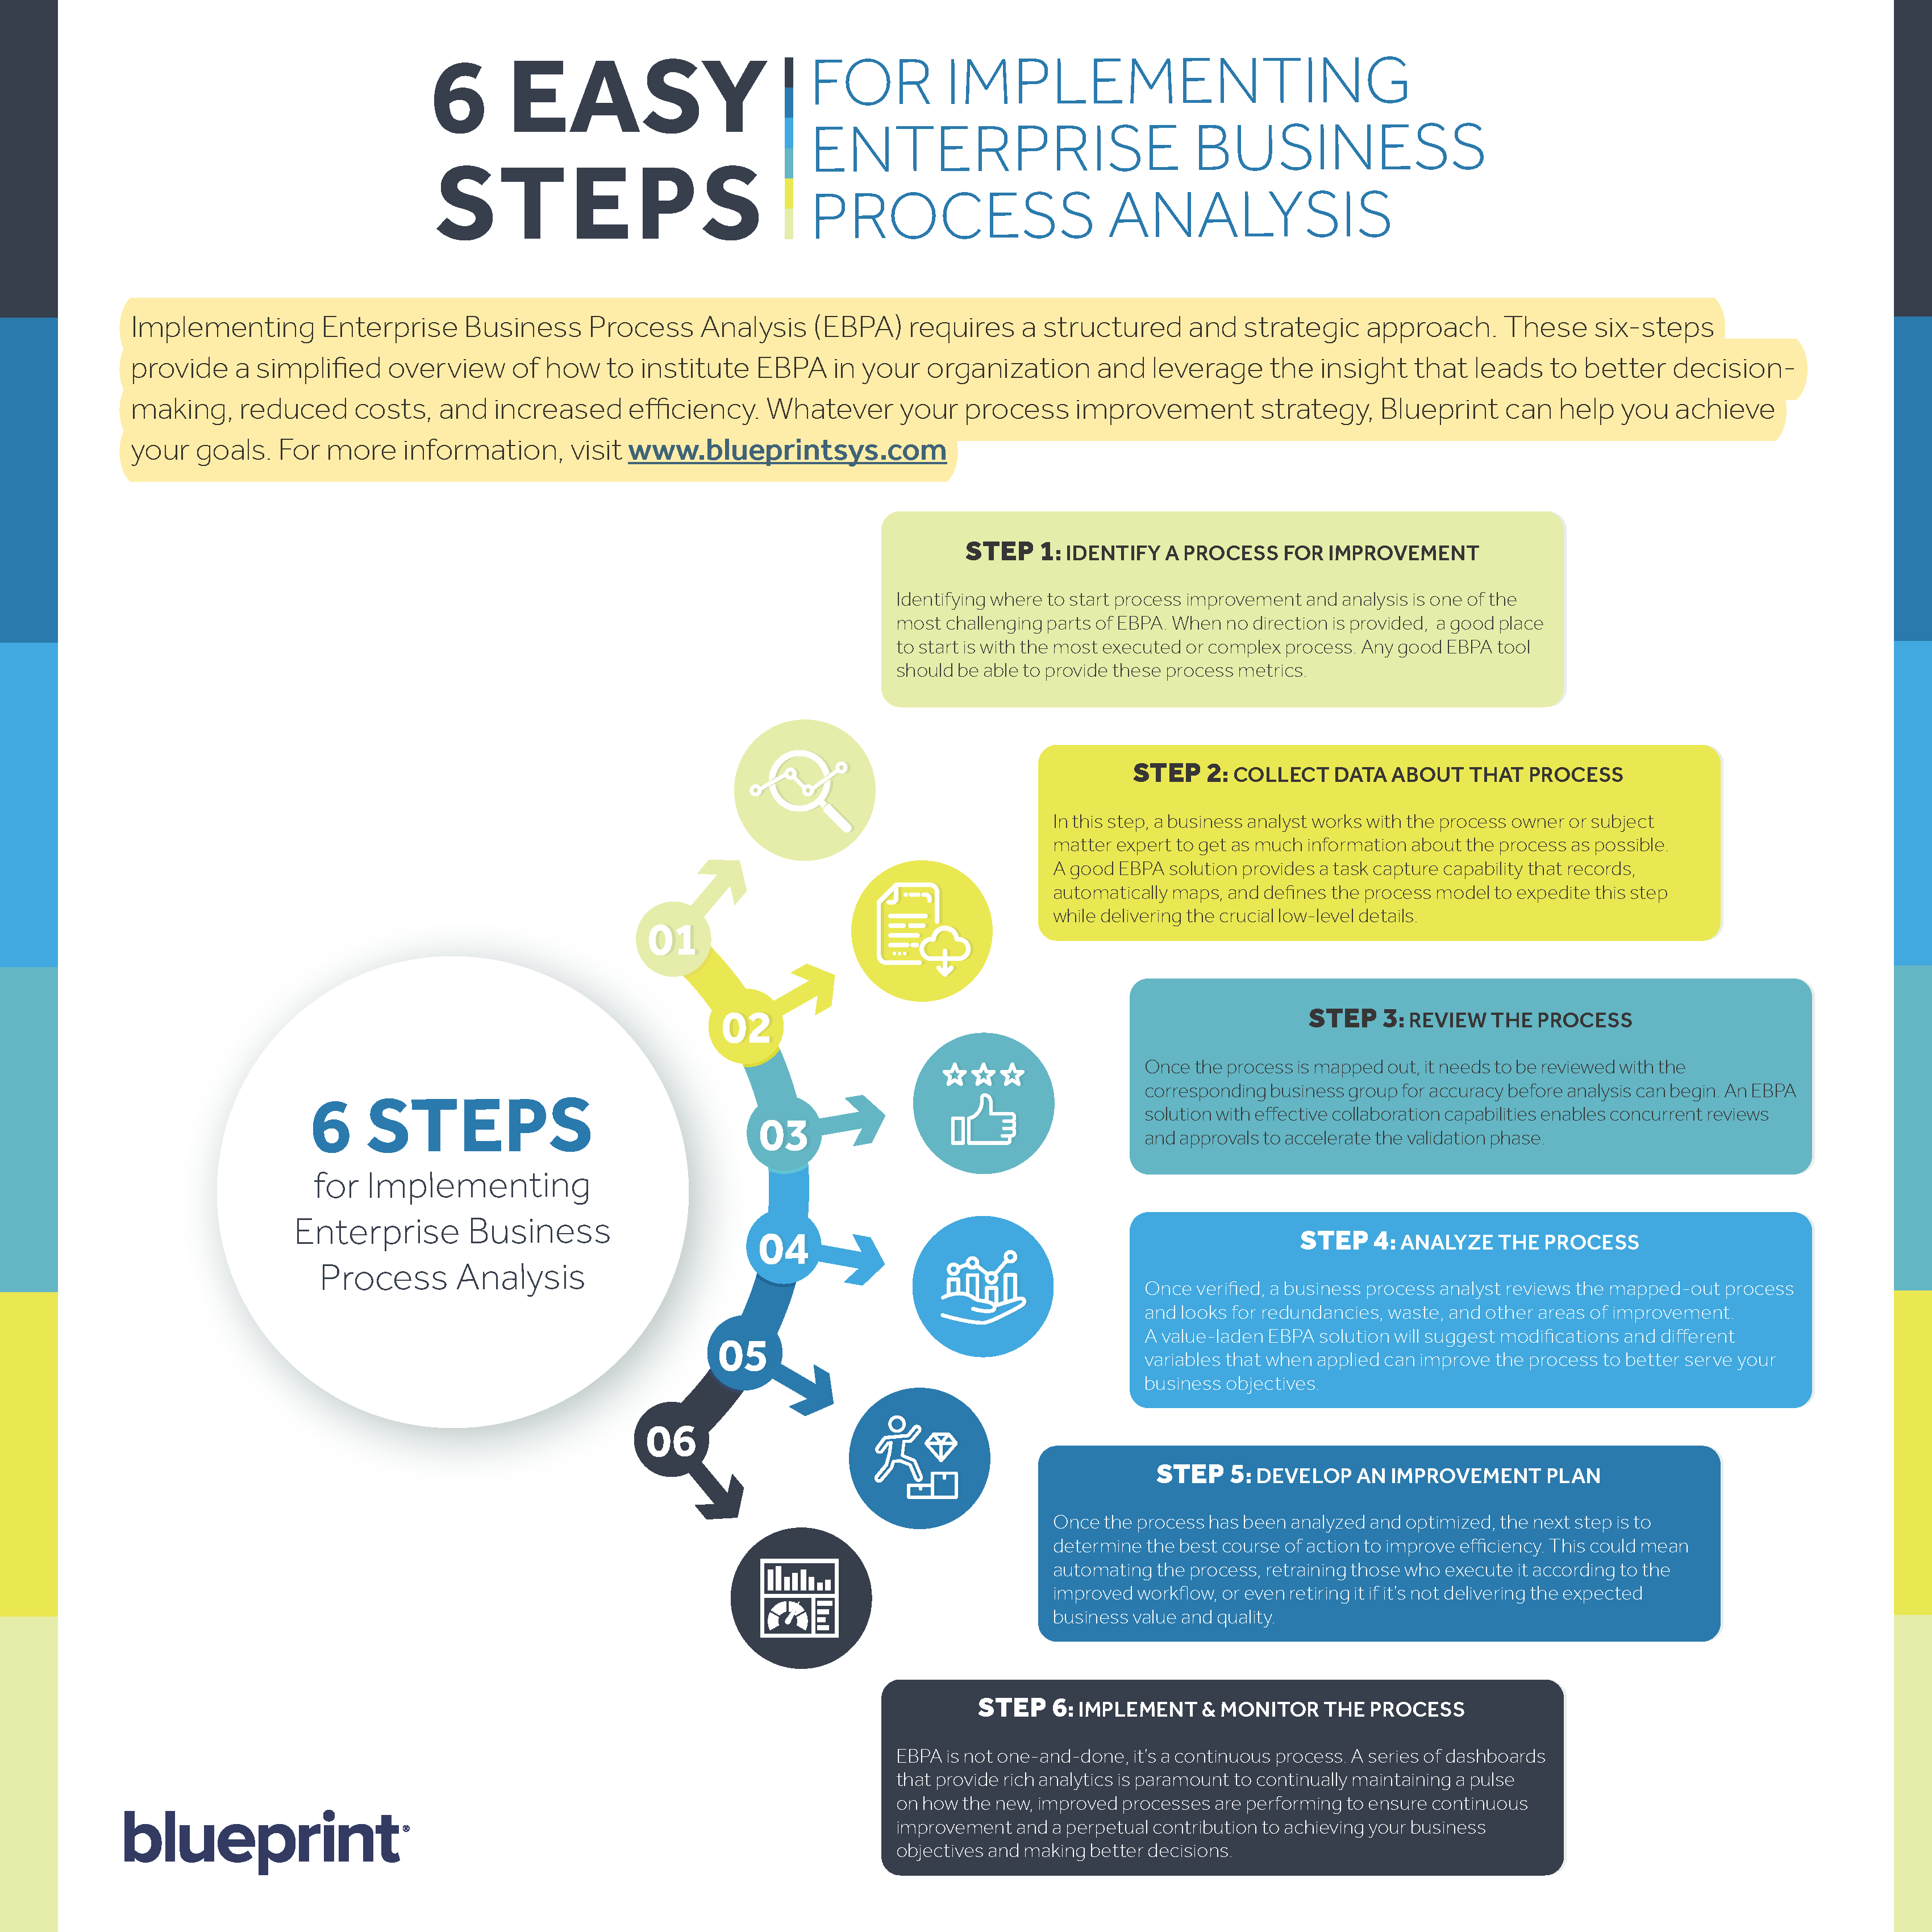 INFOGRAPHIC: 6 Easy Steps for Implementing Enterprise Business Process Analysis (EBPA)